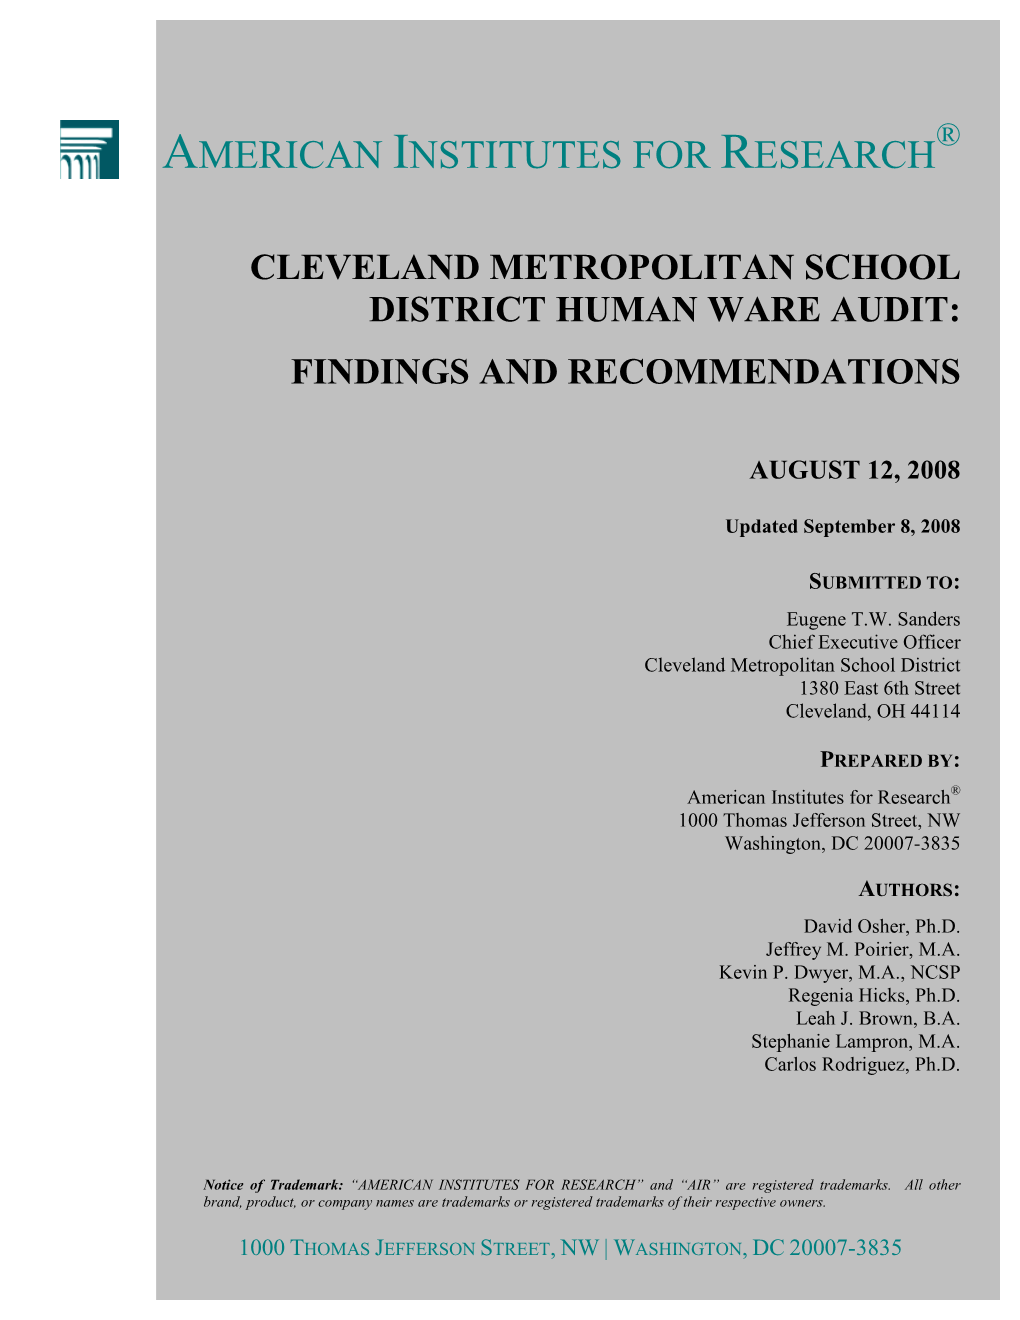 Cleveland Metropolitan School District Human Ware Audit: Findings and Recommendations